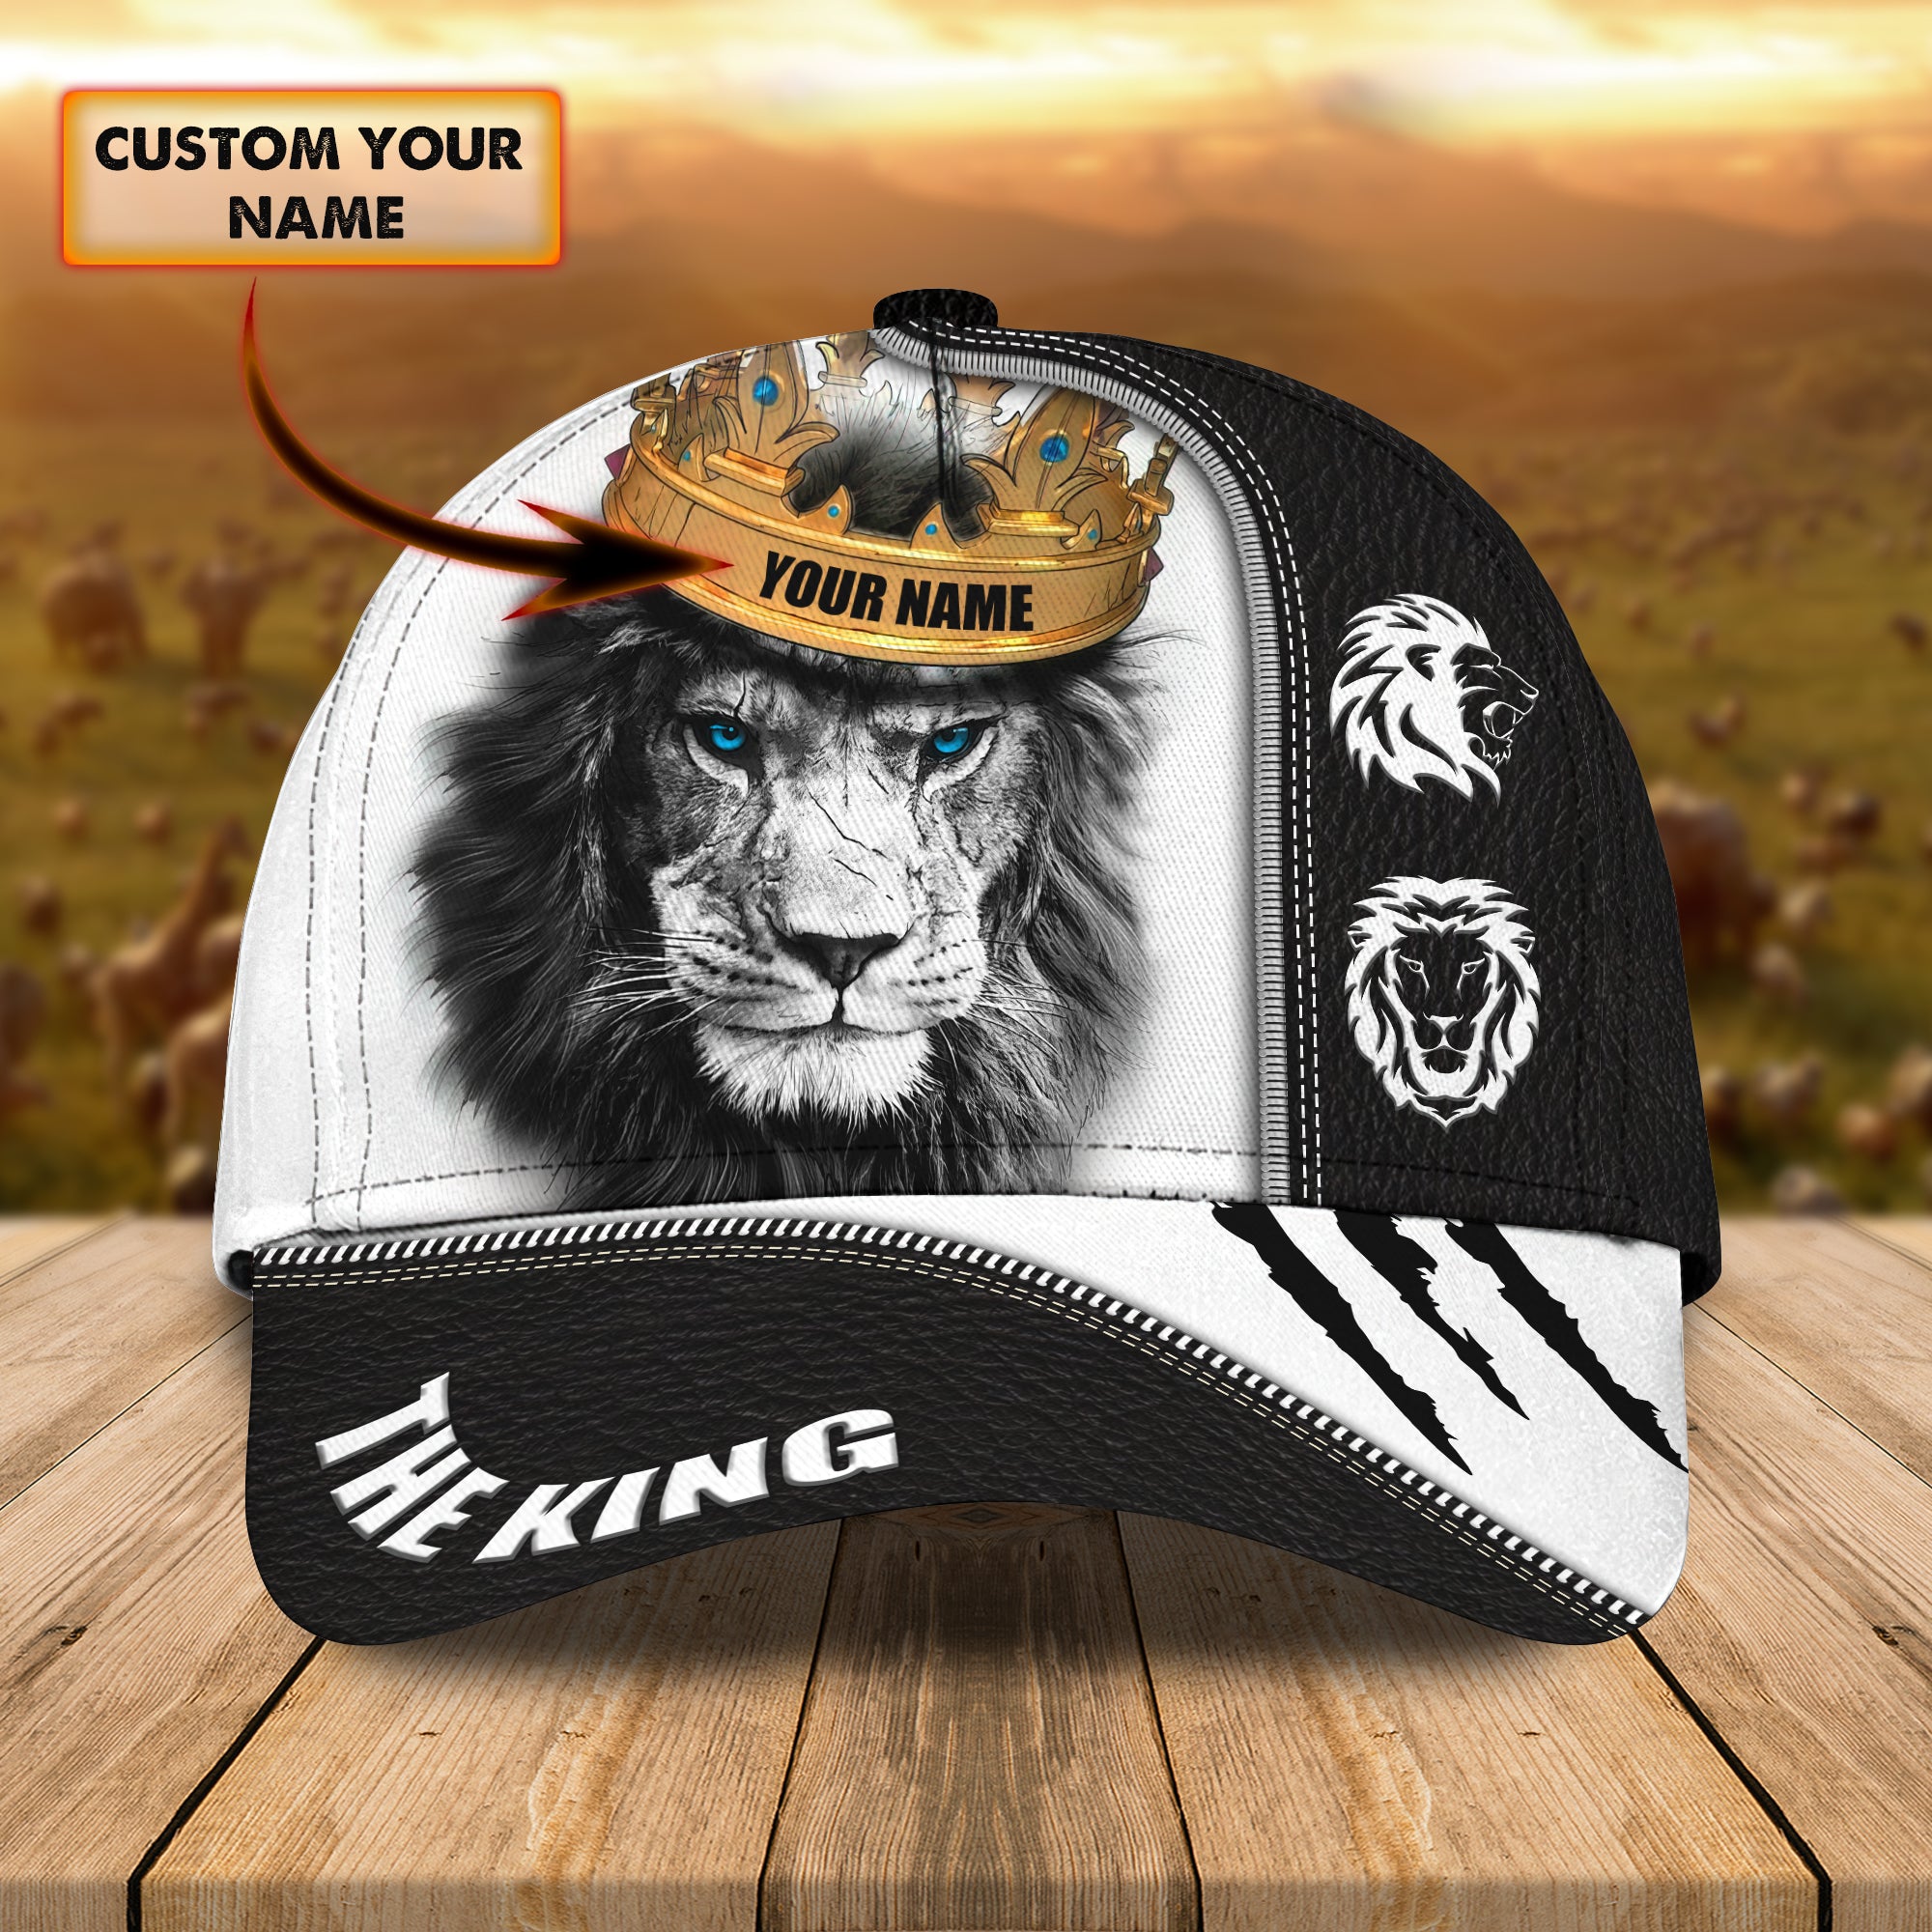 THE KING - Personalized Name Cap 01- RINC98